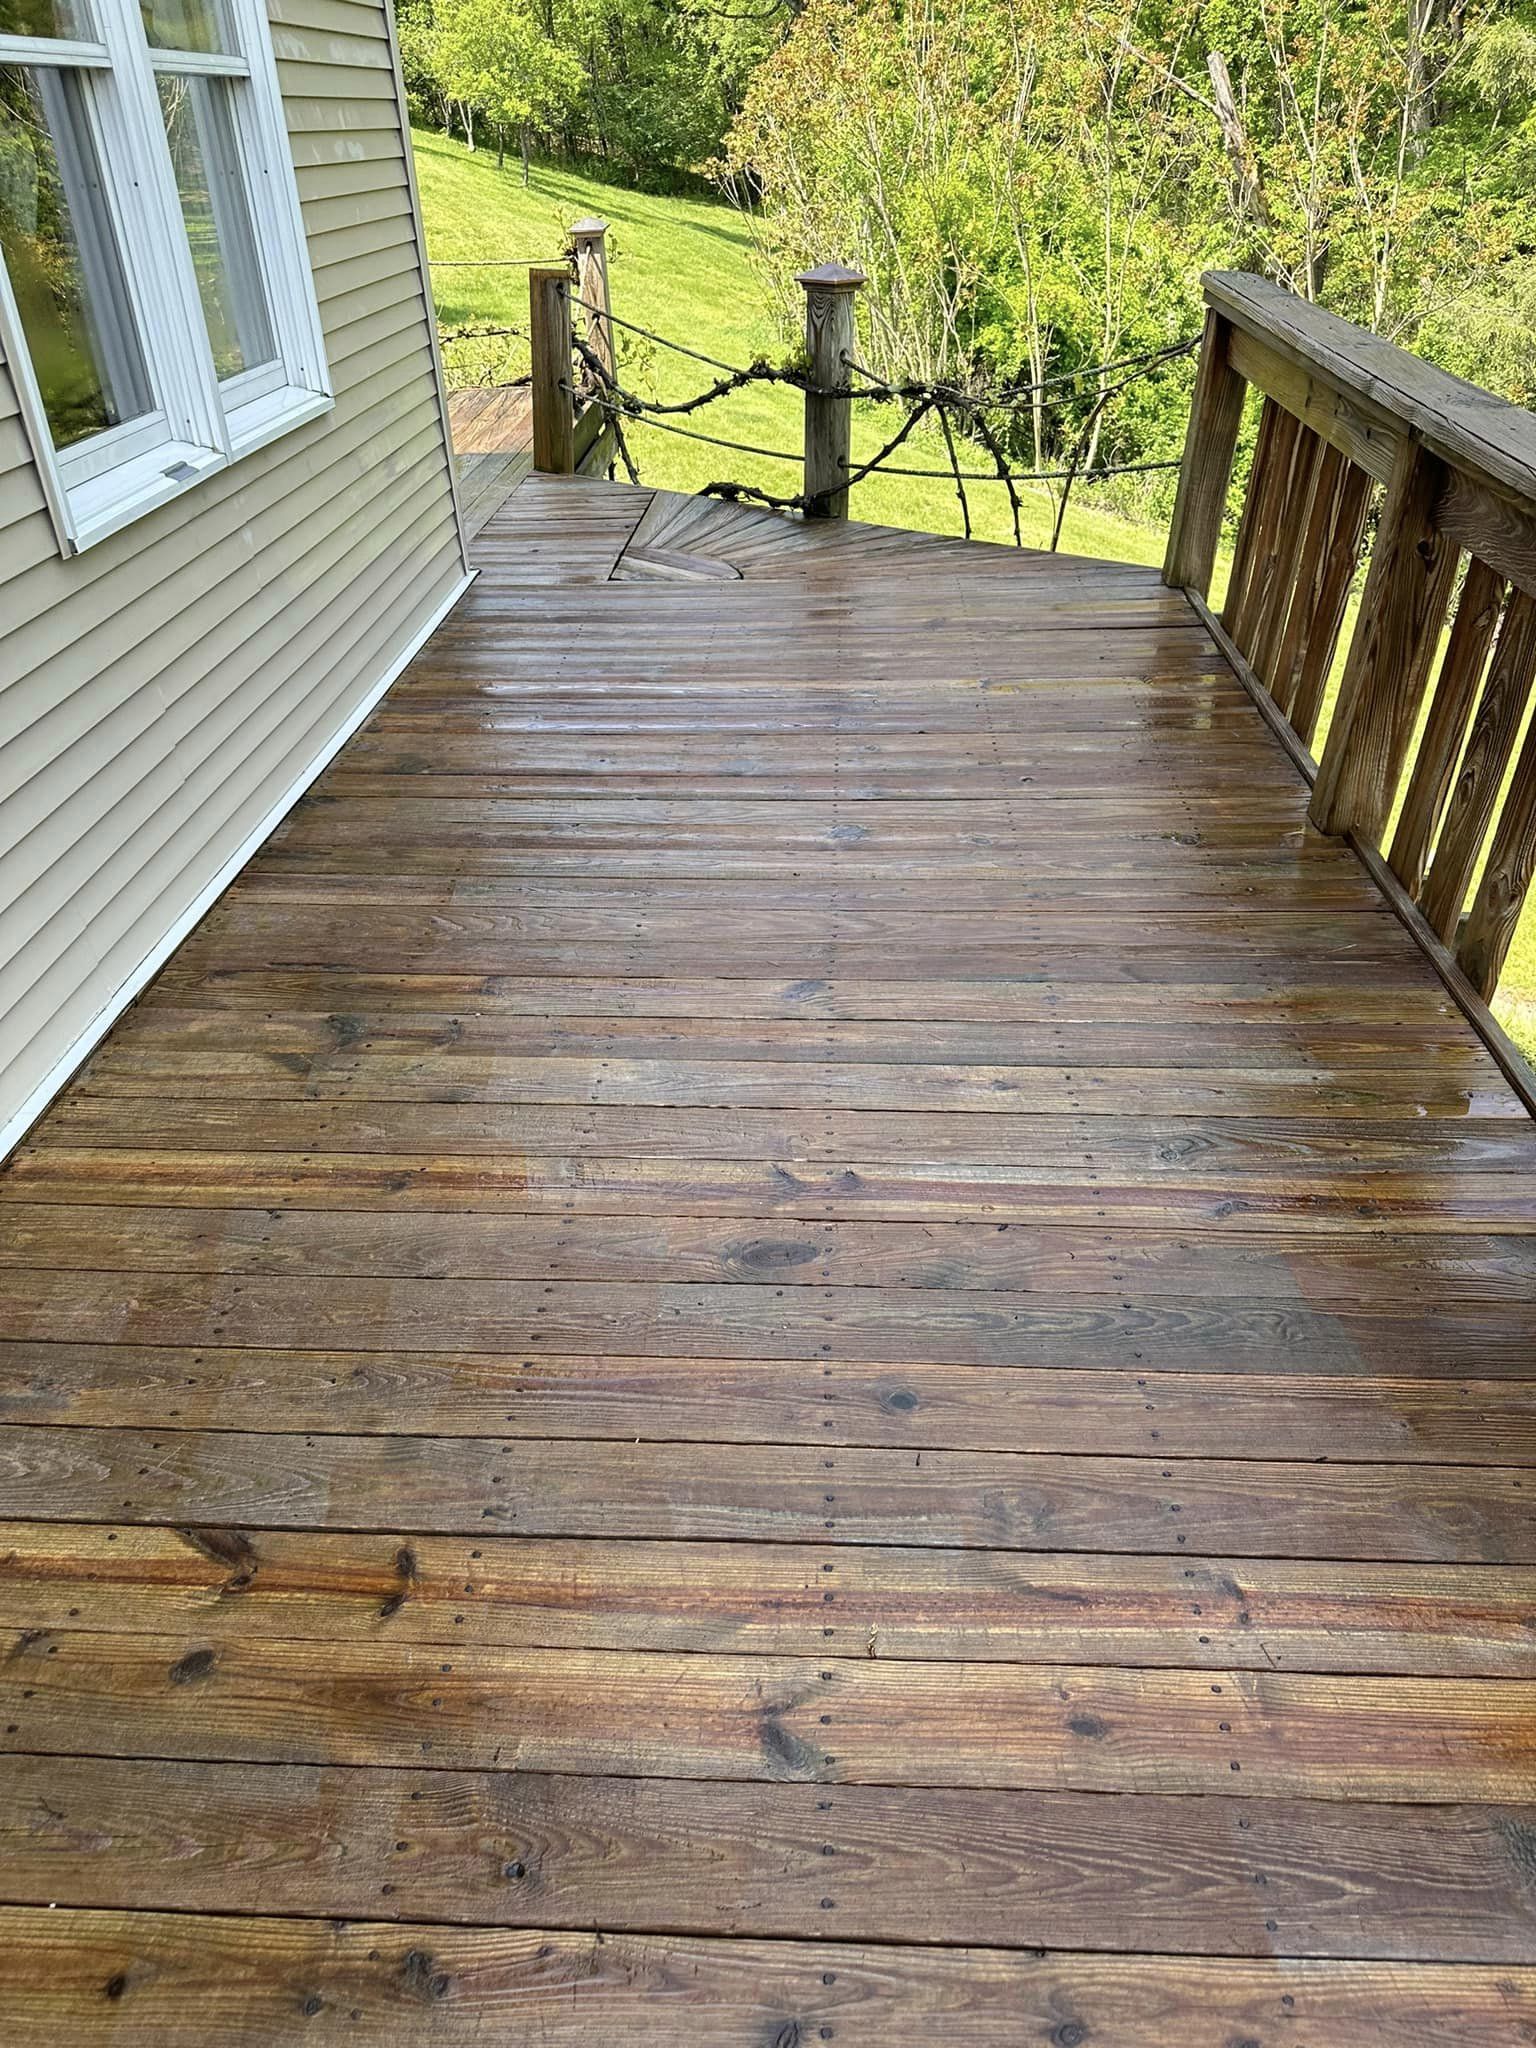 Expert pressure washing services for fence and deck cleaning in Lititz PA by NextGen Power Wash LLC